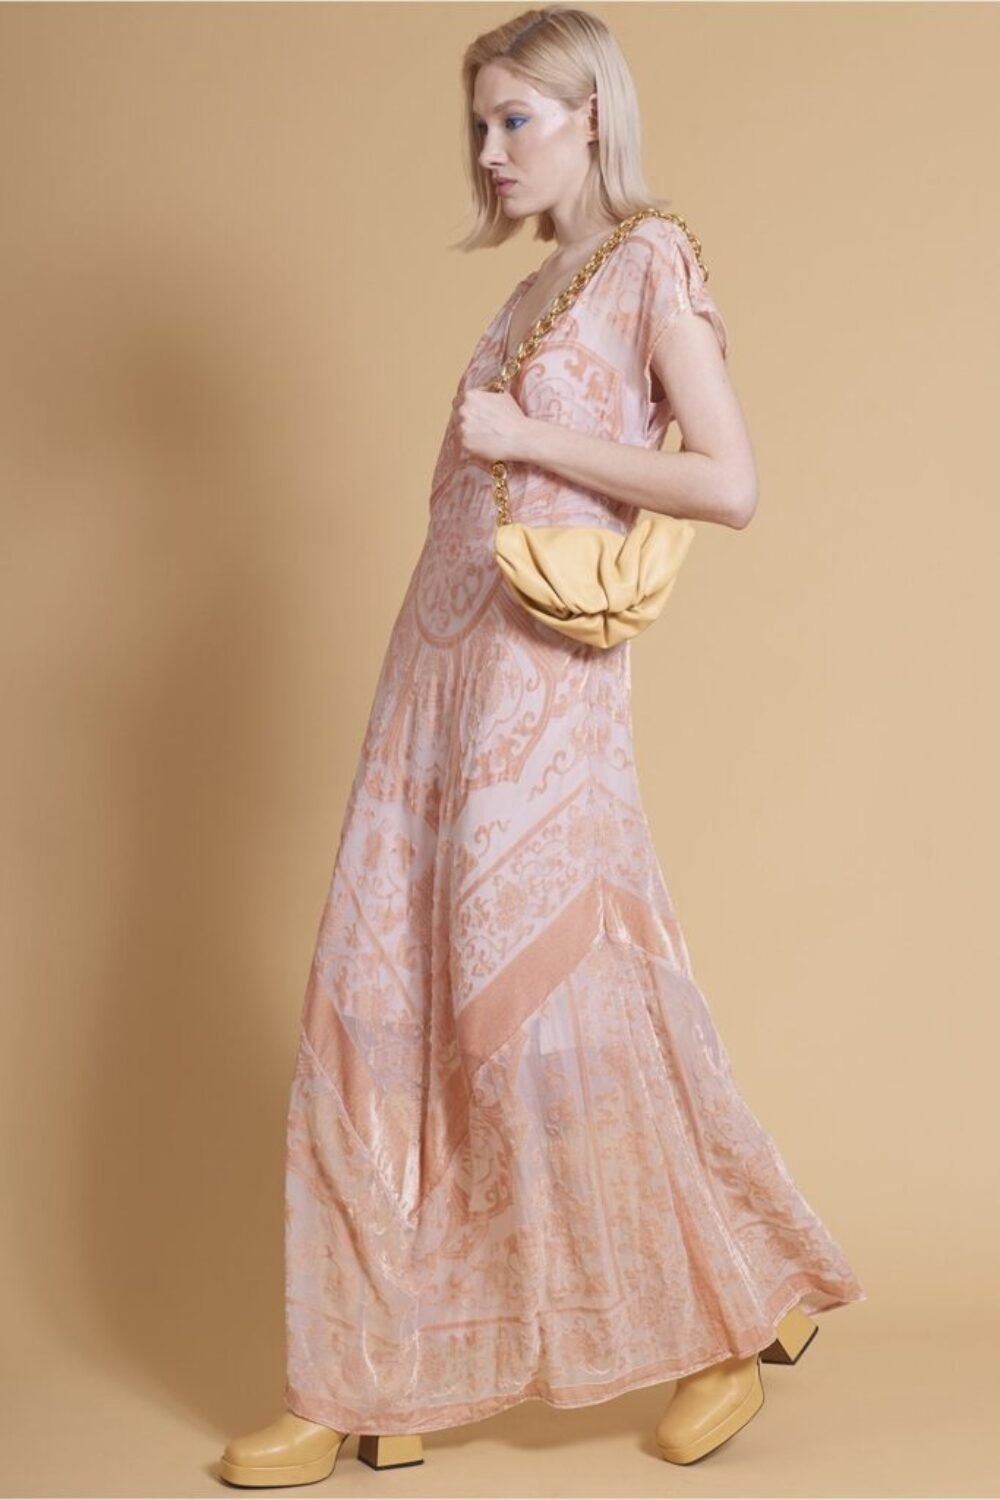 Shop Lux Pink Silk Devore Dress and women's luxury and designer clothes at www.lux-apparel.co.uk